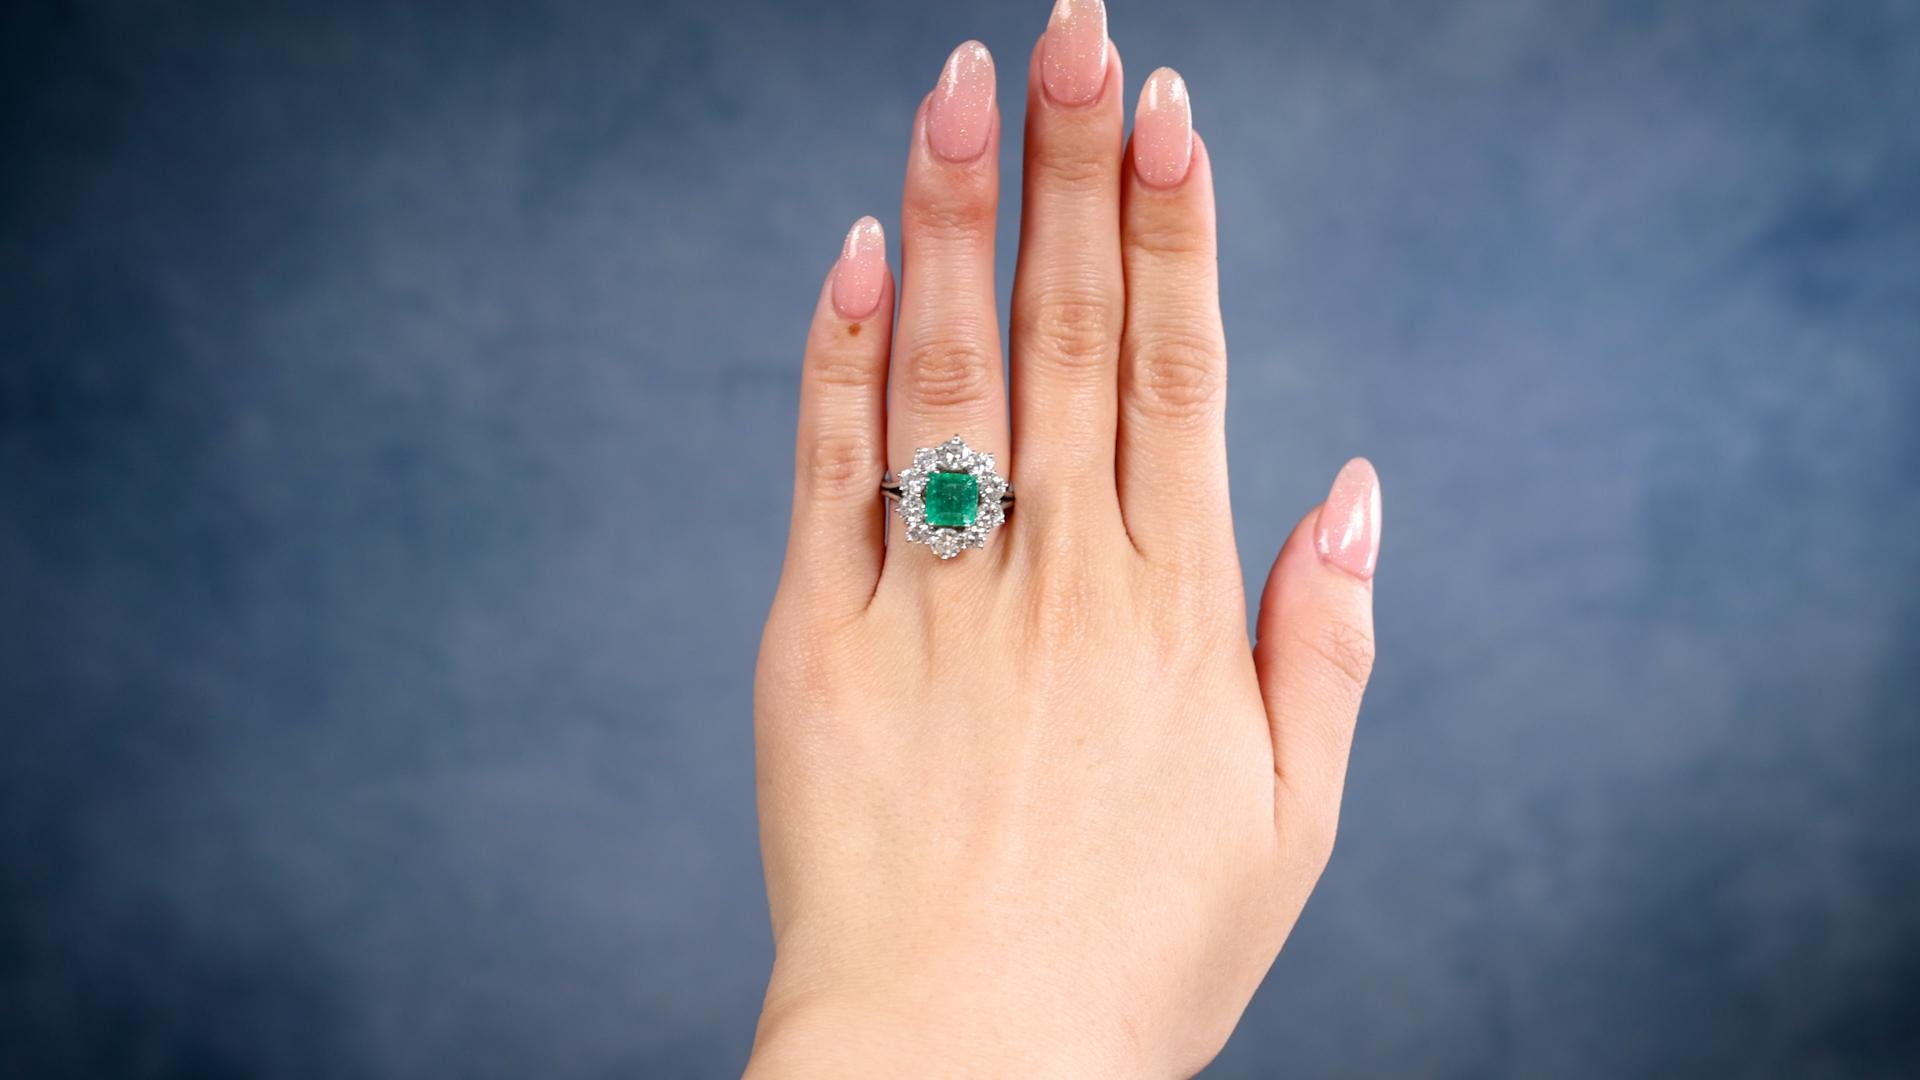 One Vintage GIA Colombian Emerald Diamond Platinum Cluster Ring. Featuring one square step cut emerald weighing approximately 1.50 carats, accompanied by GIA #2235177987 stating the stone is of Colombian origin. Accented by 10 round brilliant cut